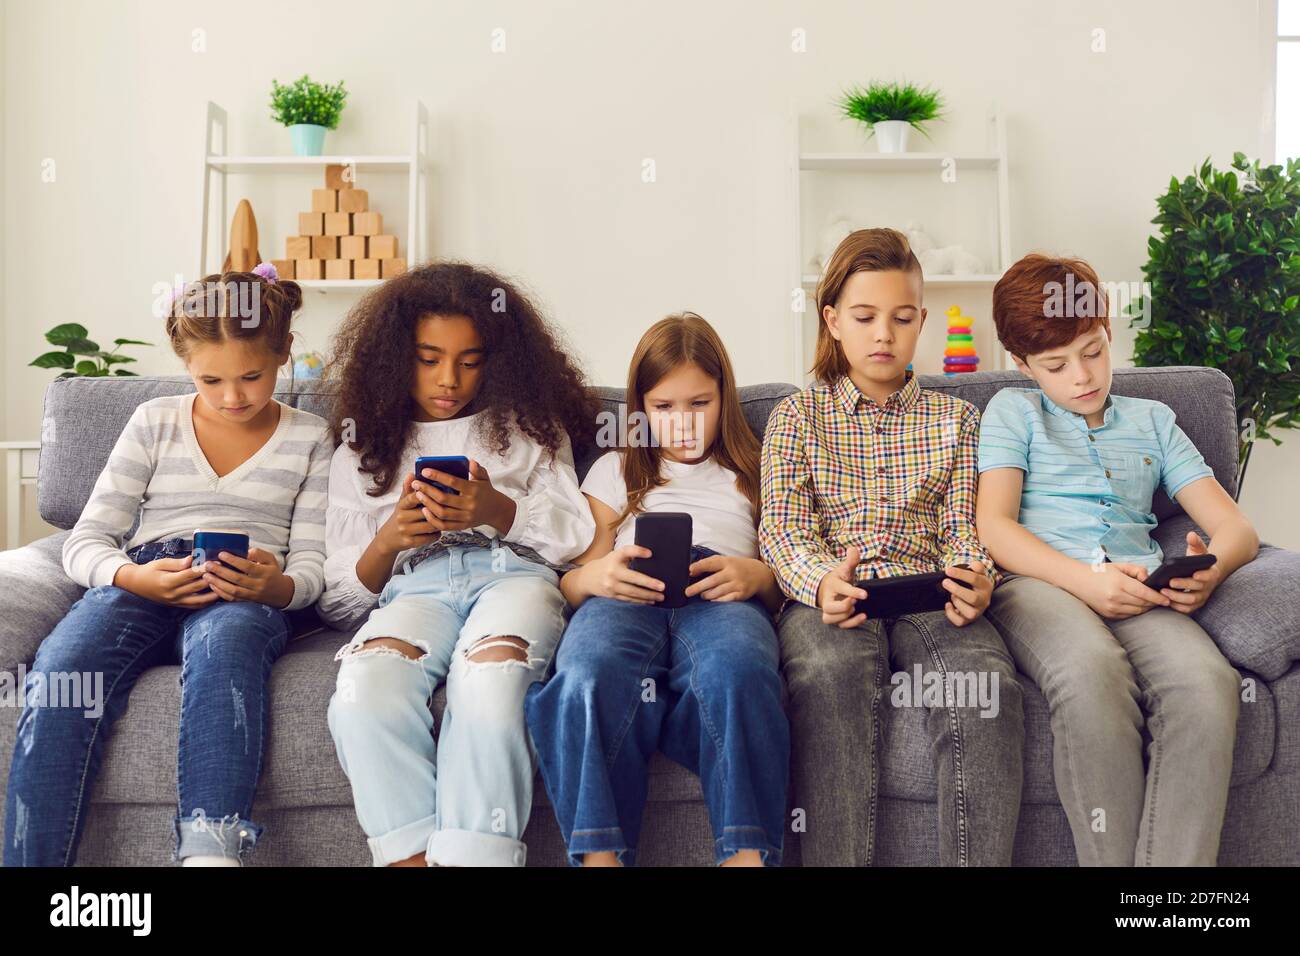 Group of unhappy children play online games or read social networks on mobile phones. Stock Photo